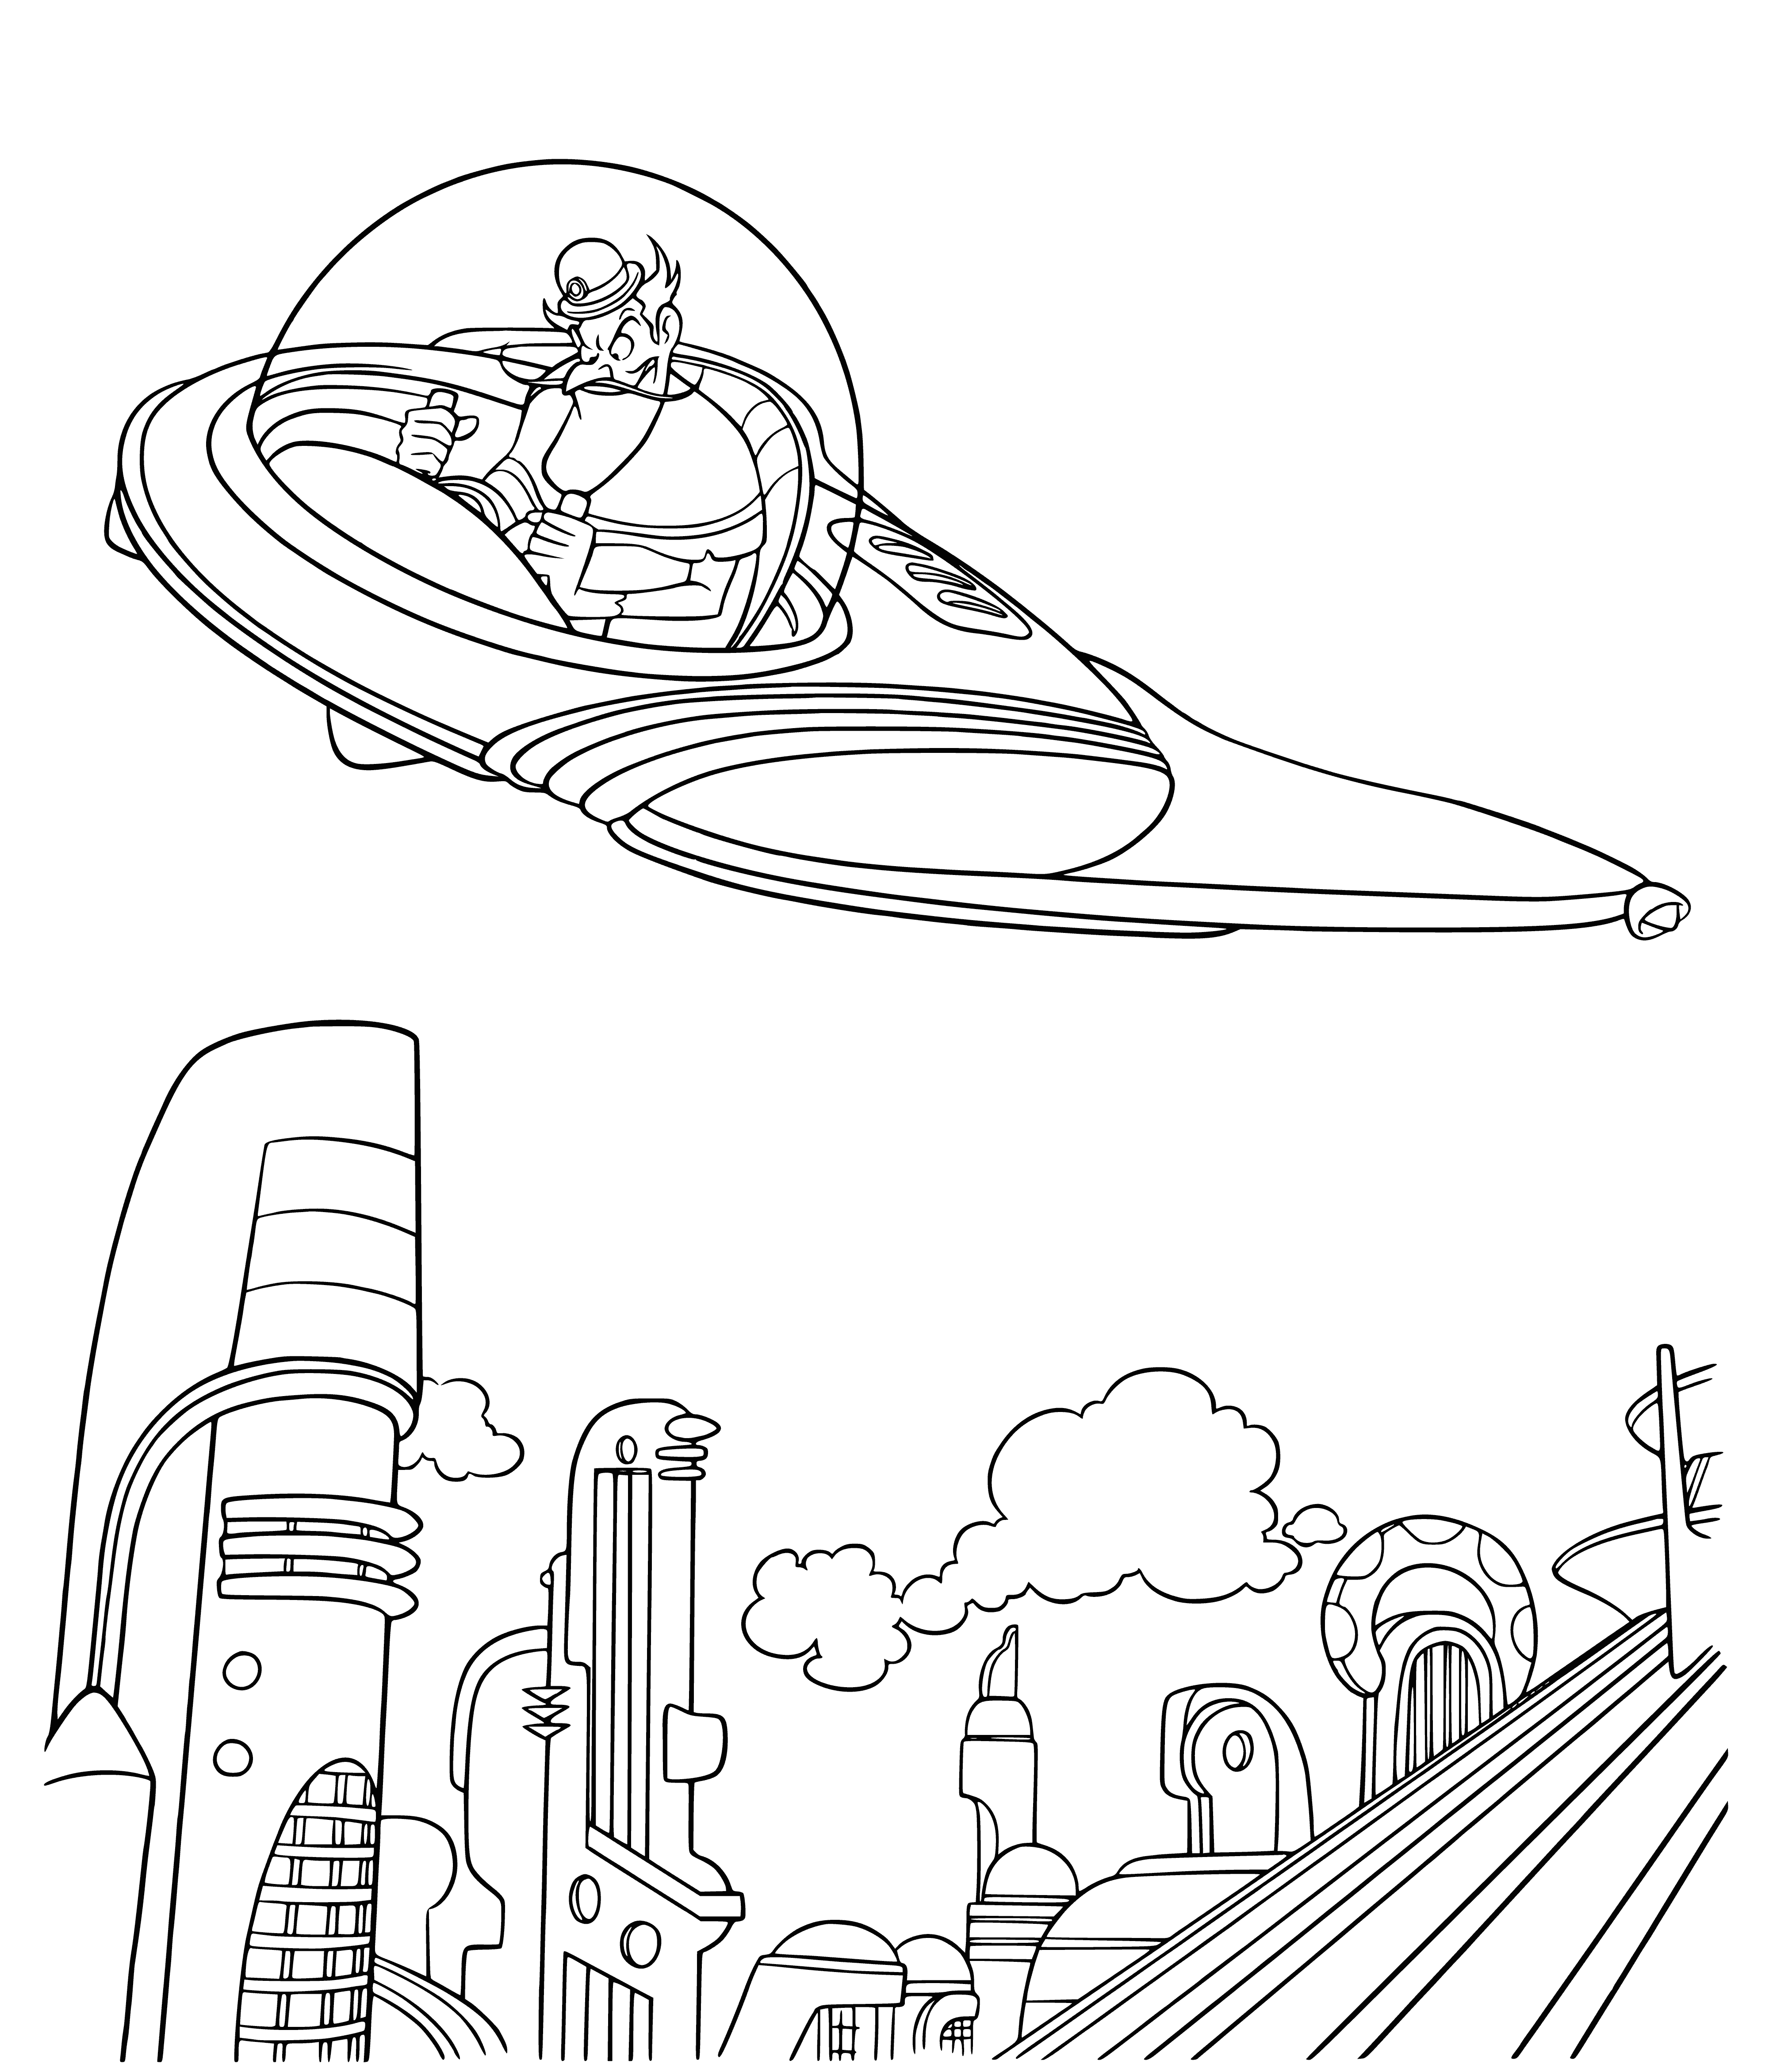 City of the future coloring page